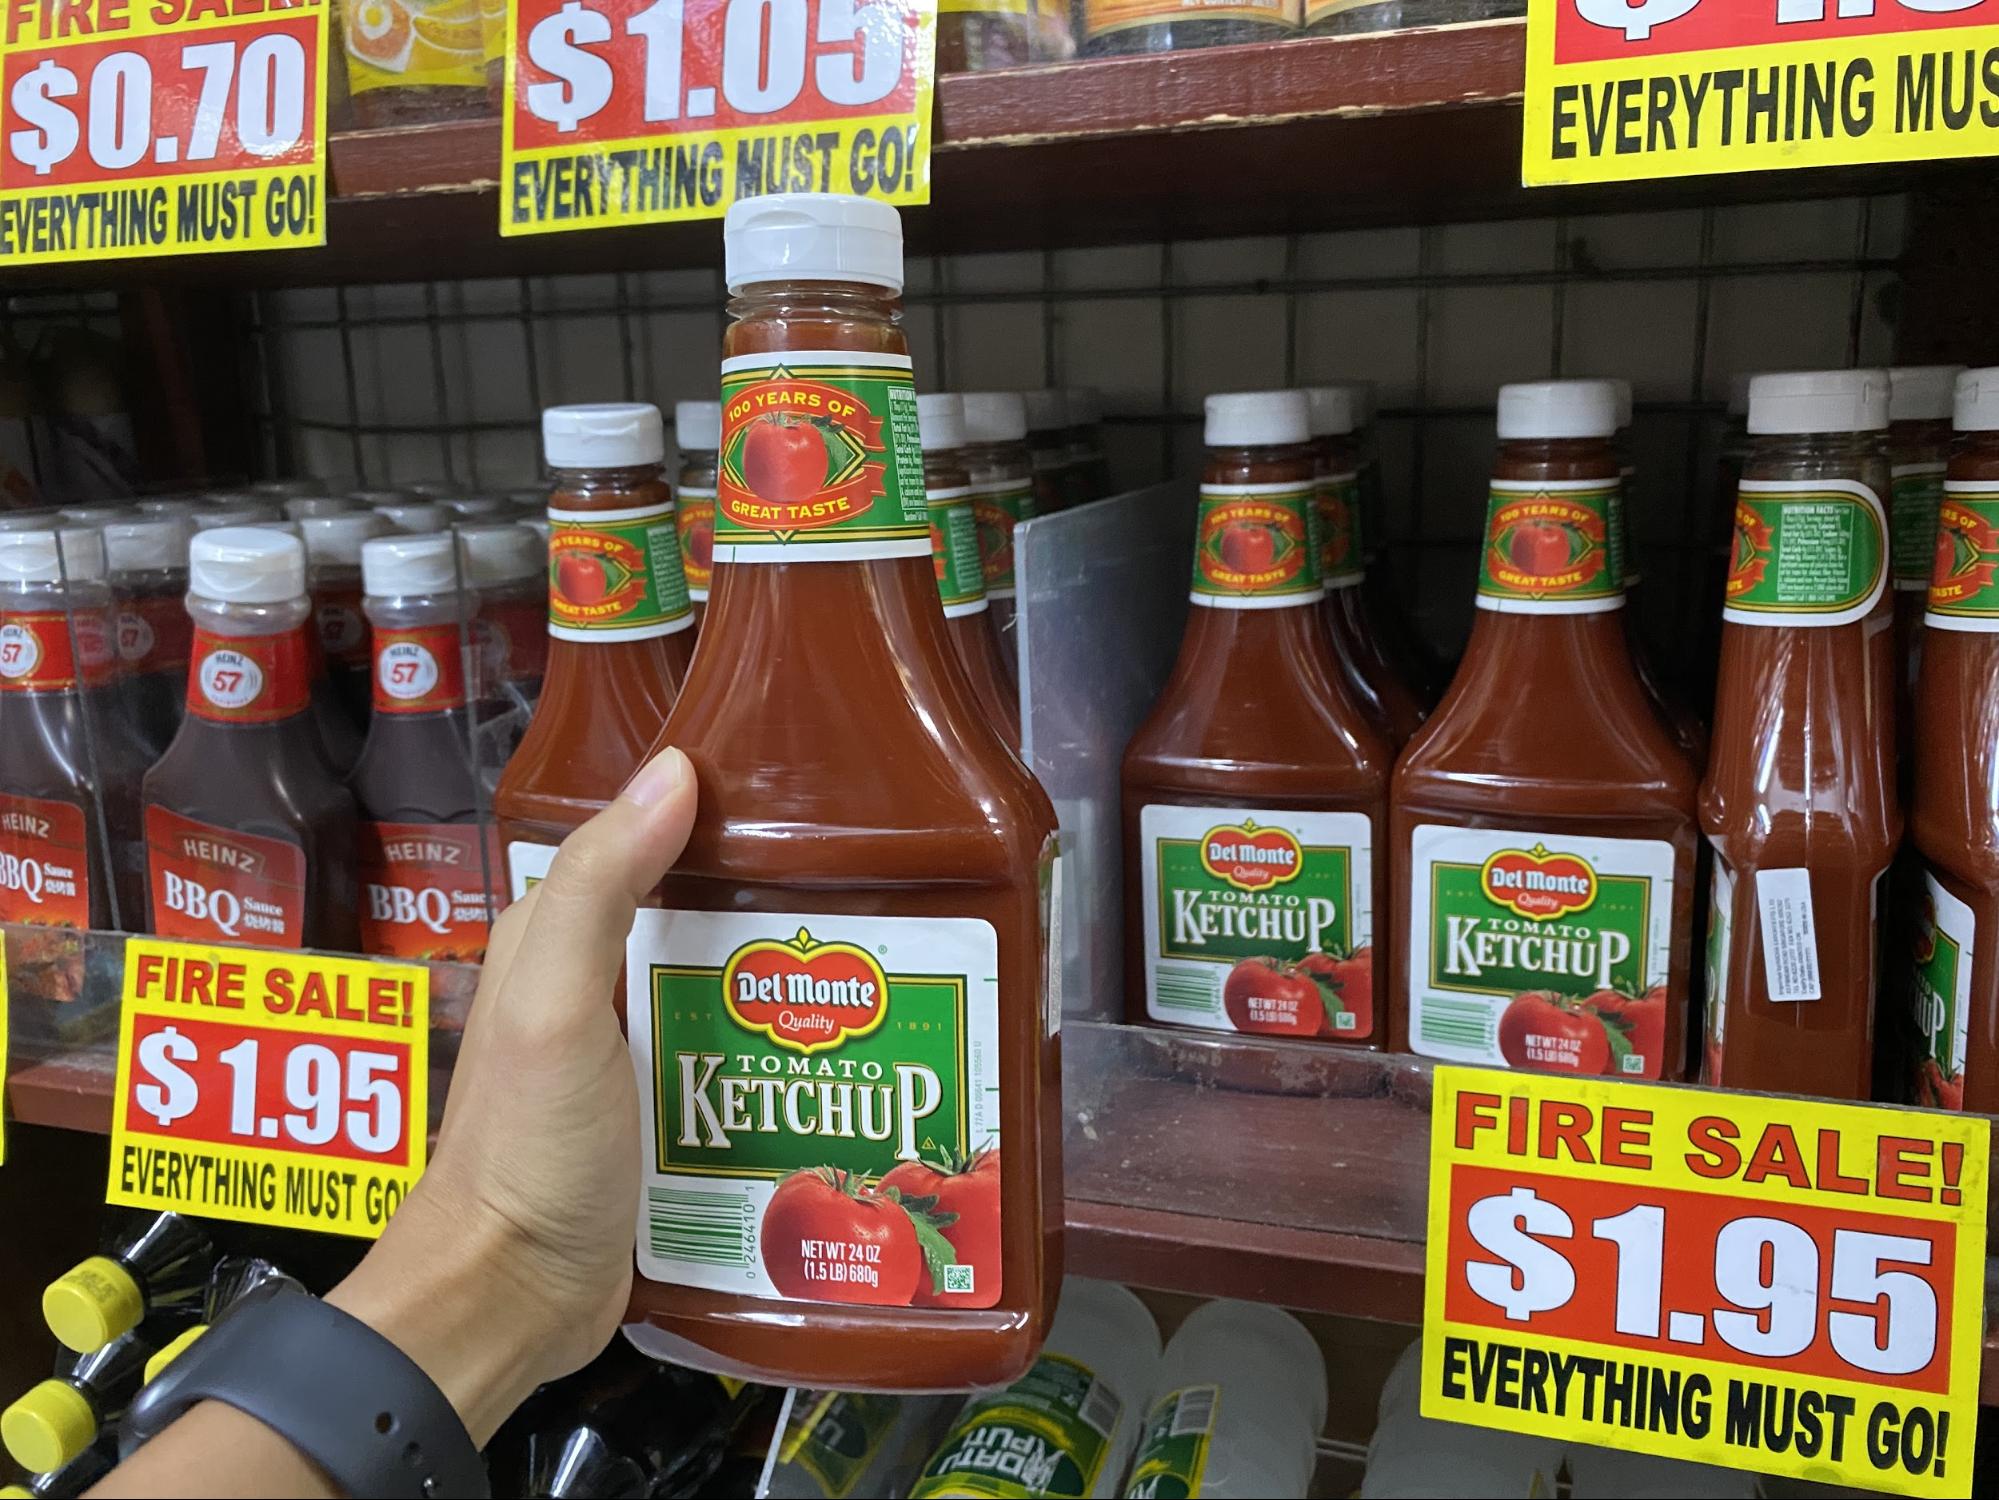 Del Monte ketchup at the value dollar store in Singapore